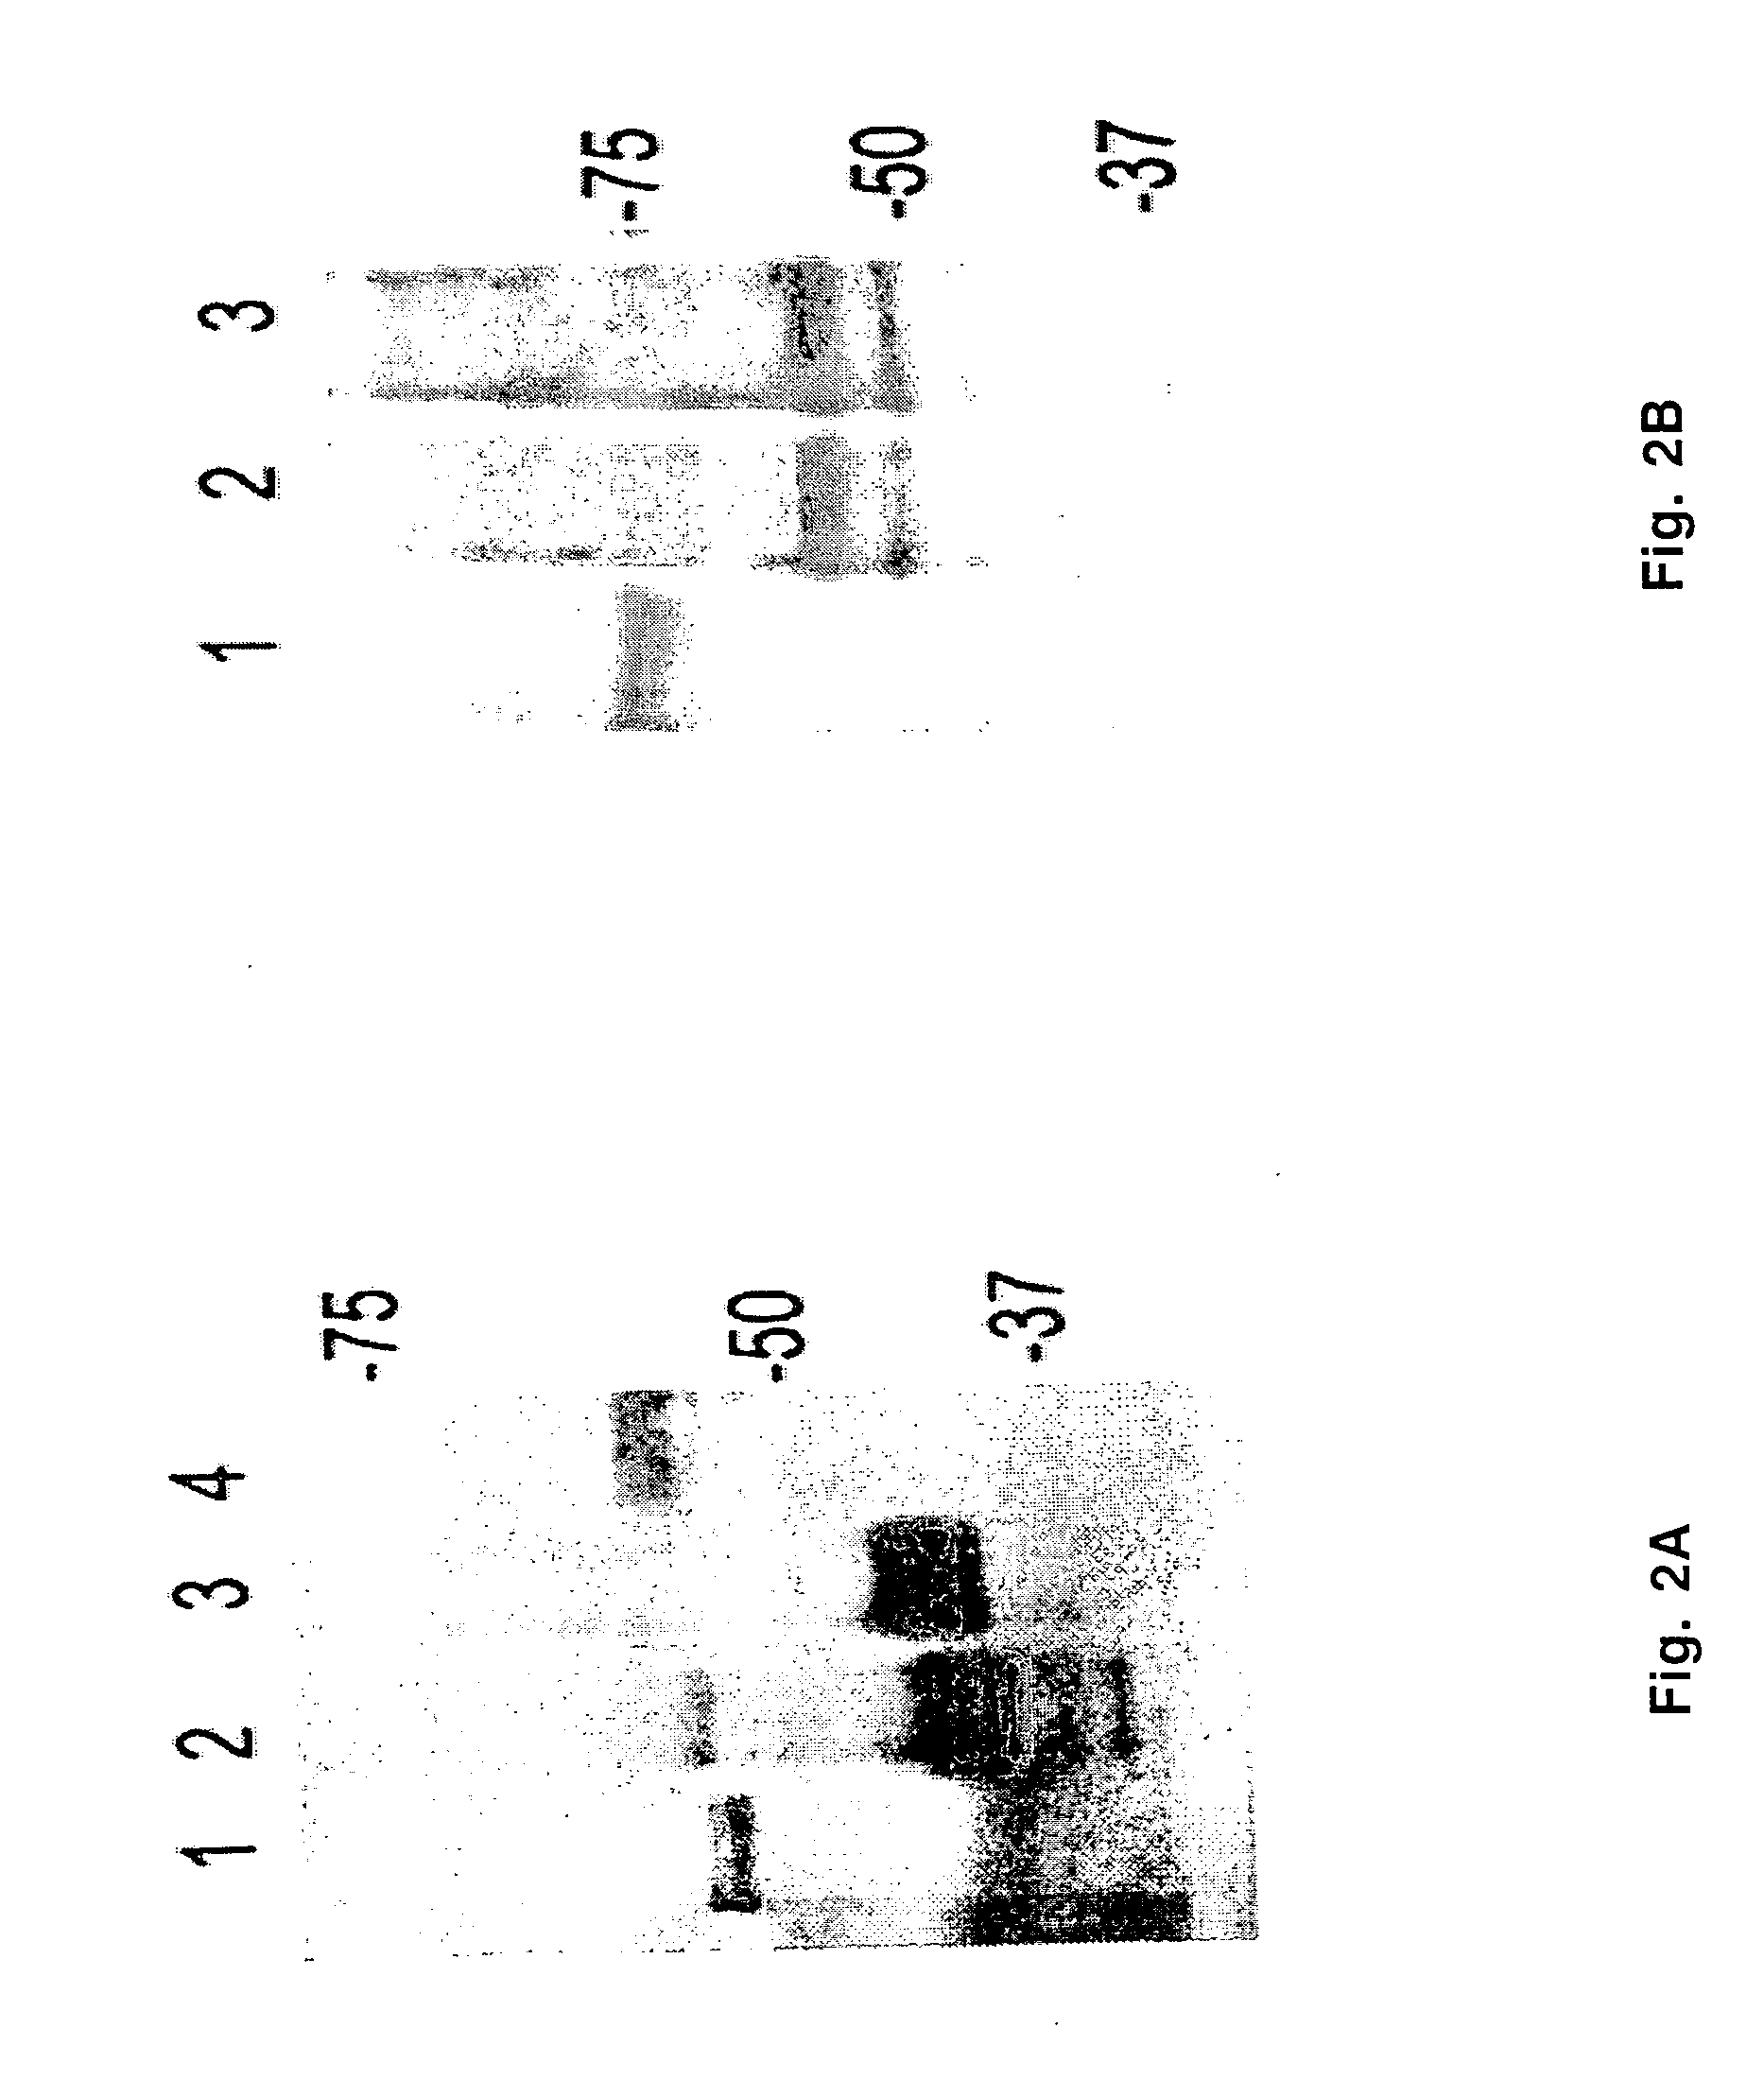 P153 and P156 antigens for the immunodiagnosis of canine and human ehrlichioses and uses thereof